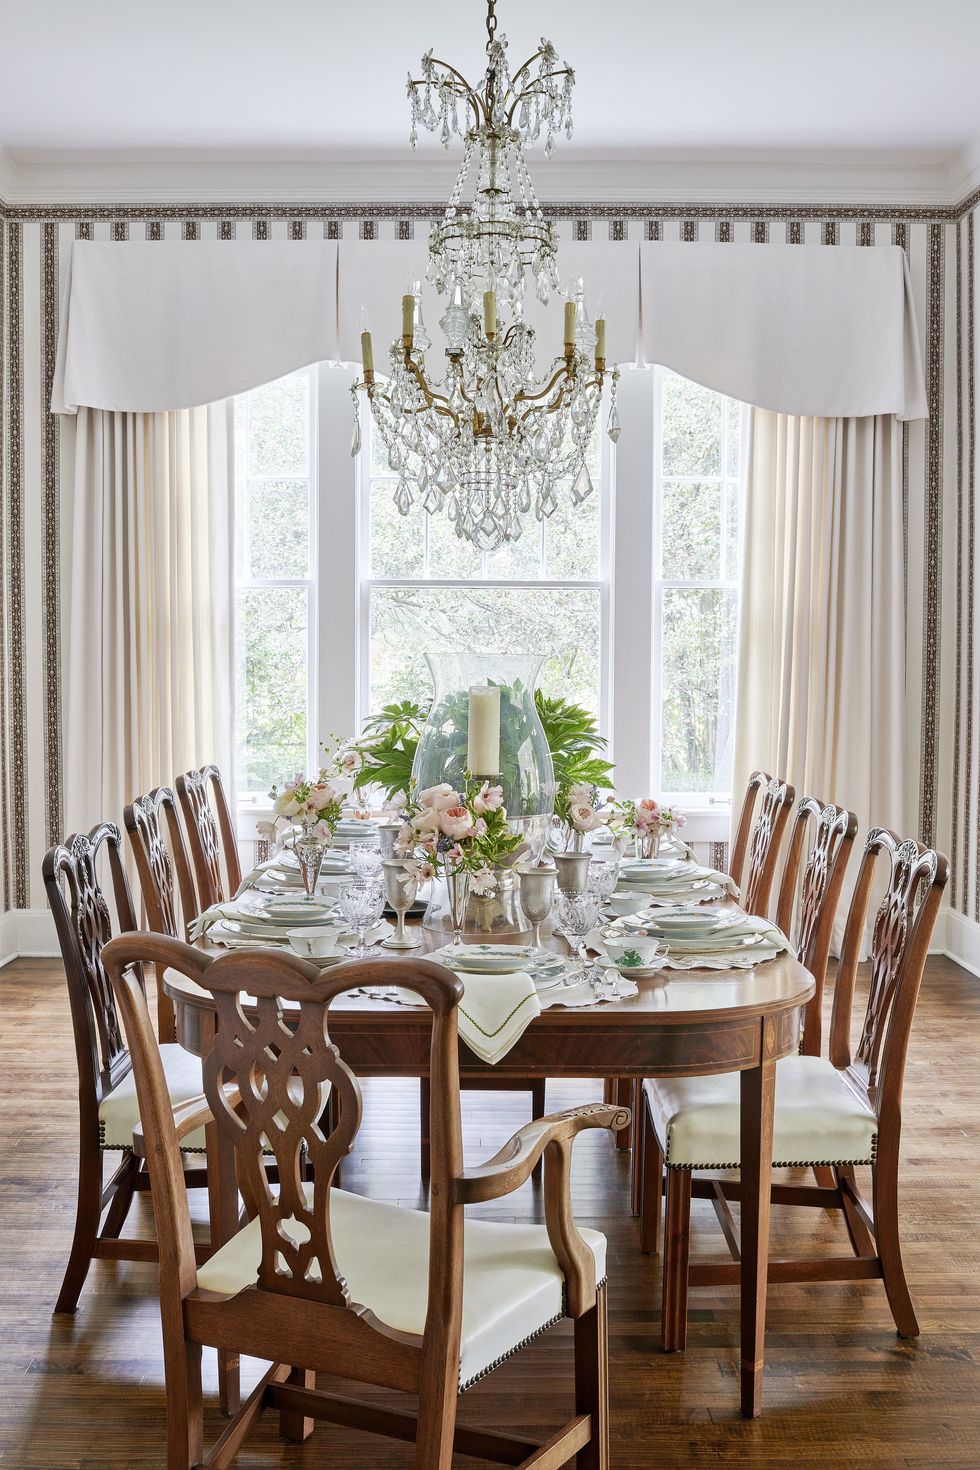 the dining room table and leather upholstered chairs are estate pieces, and the crystal chandelier is original to the home